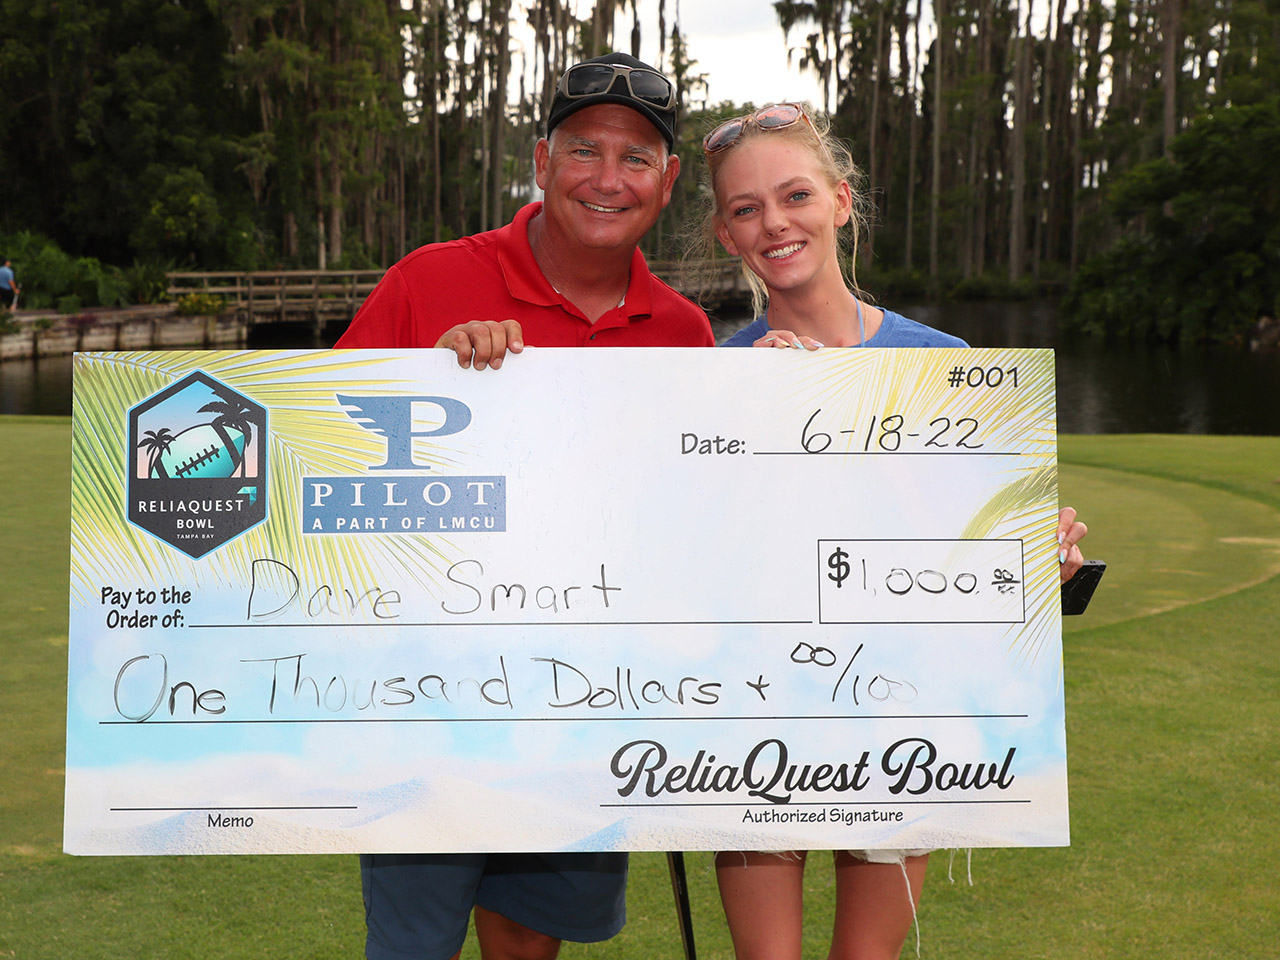 David Smith didn't win $100,000 hole-in-one but he did win the closest to the Pin in the shootout